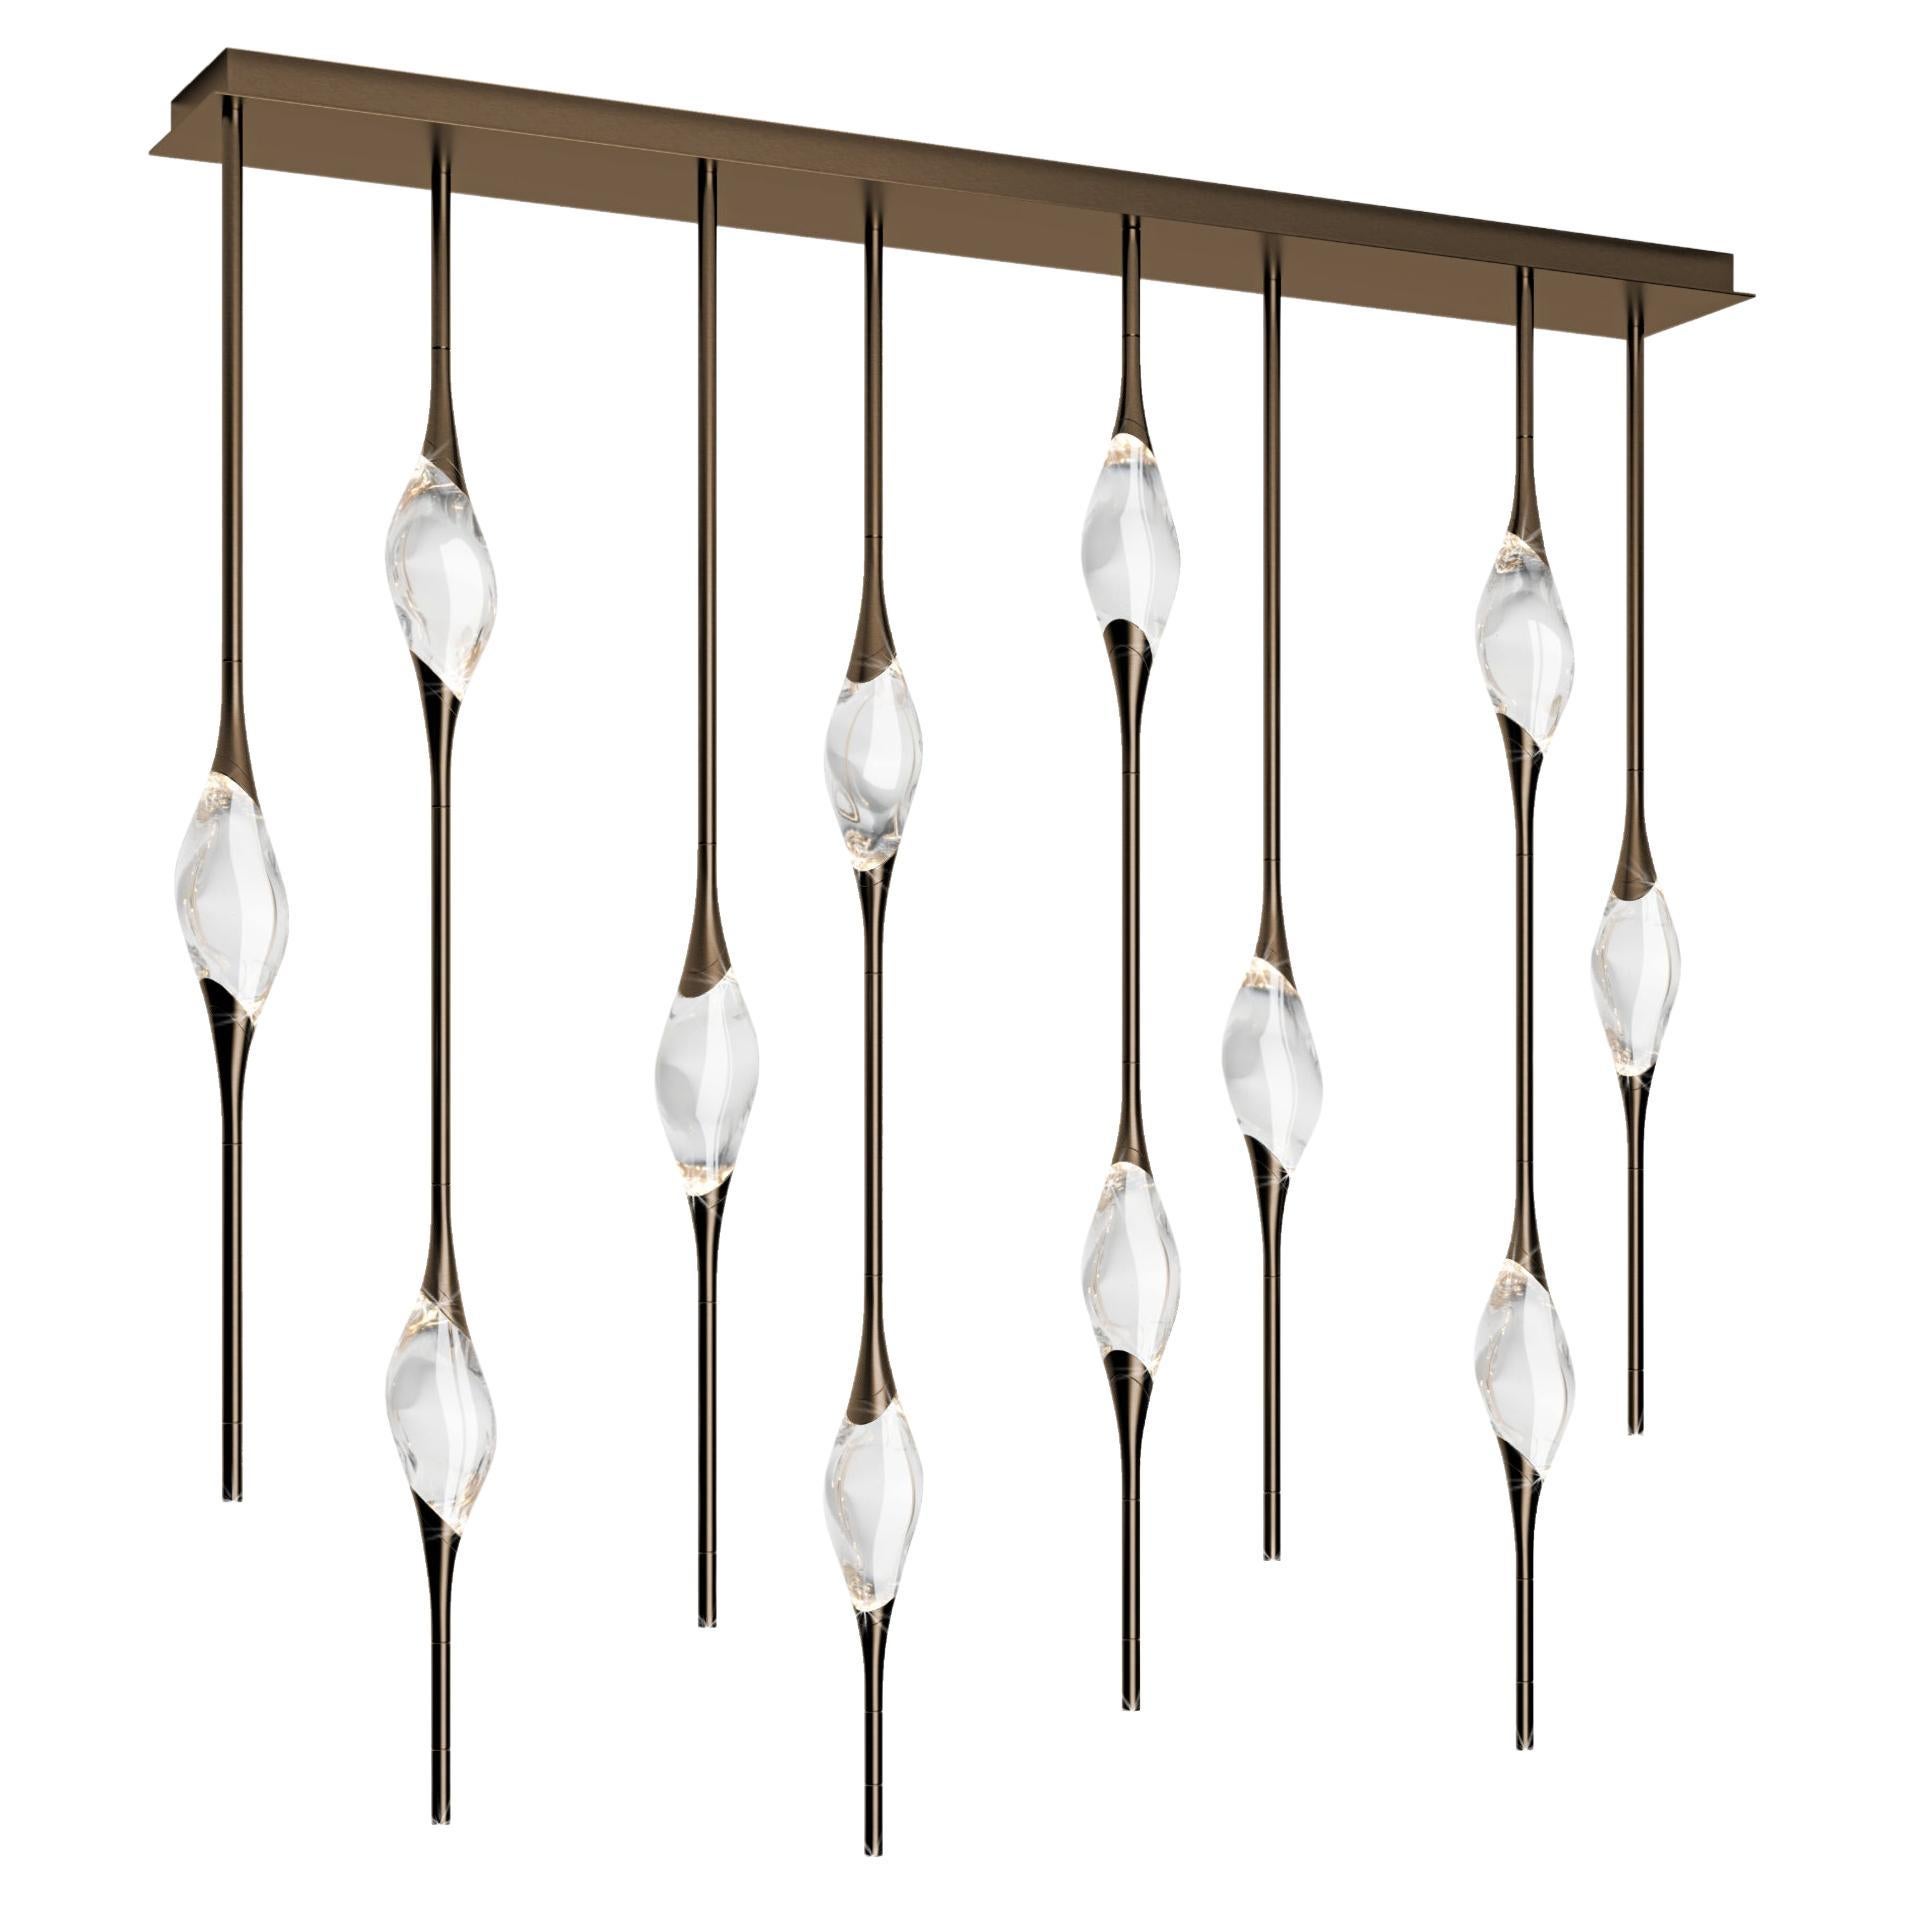 "Il Pezzo 12 Staggered Chandelier" - length 150cm/59” - bronze - crystal - LEDs